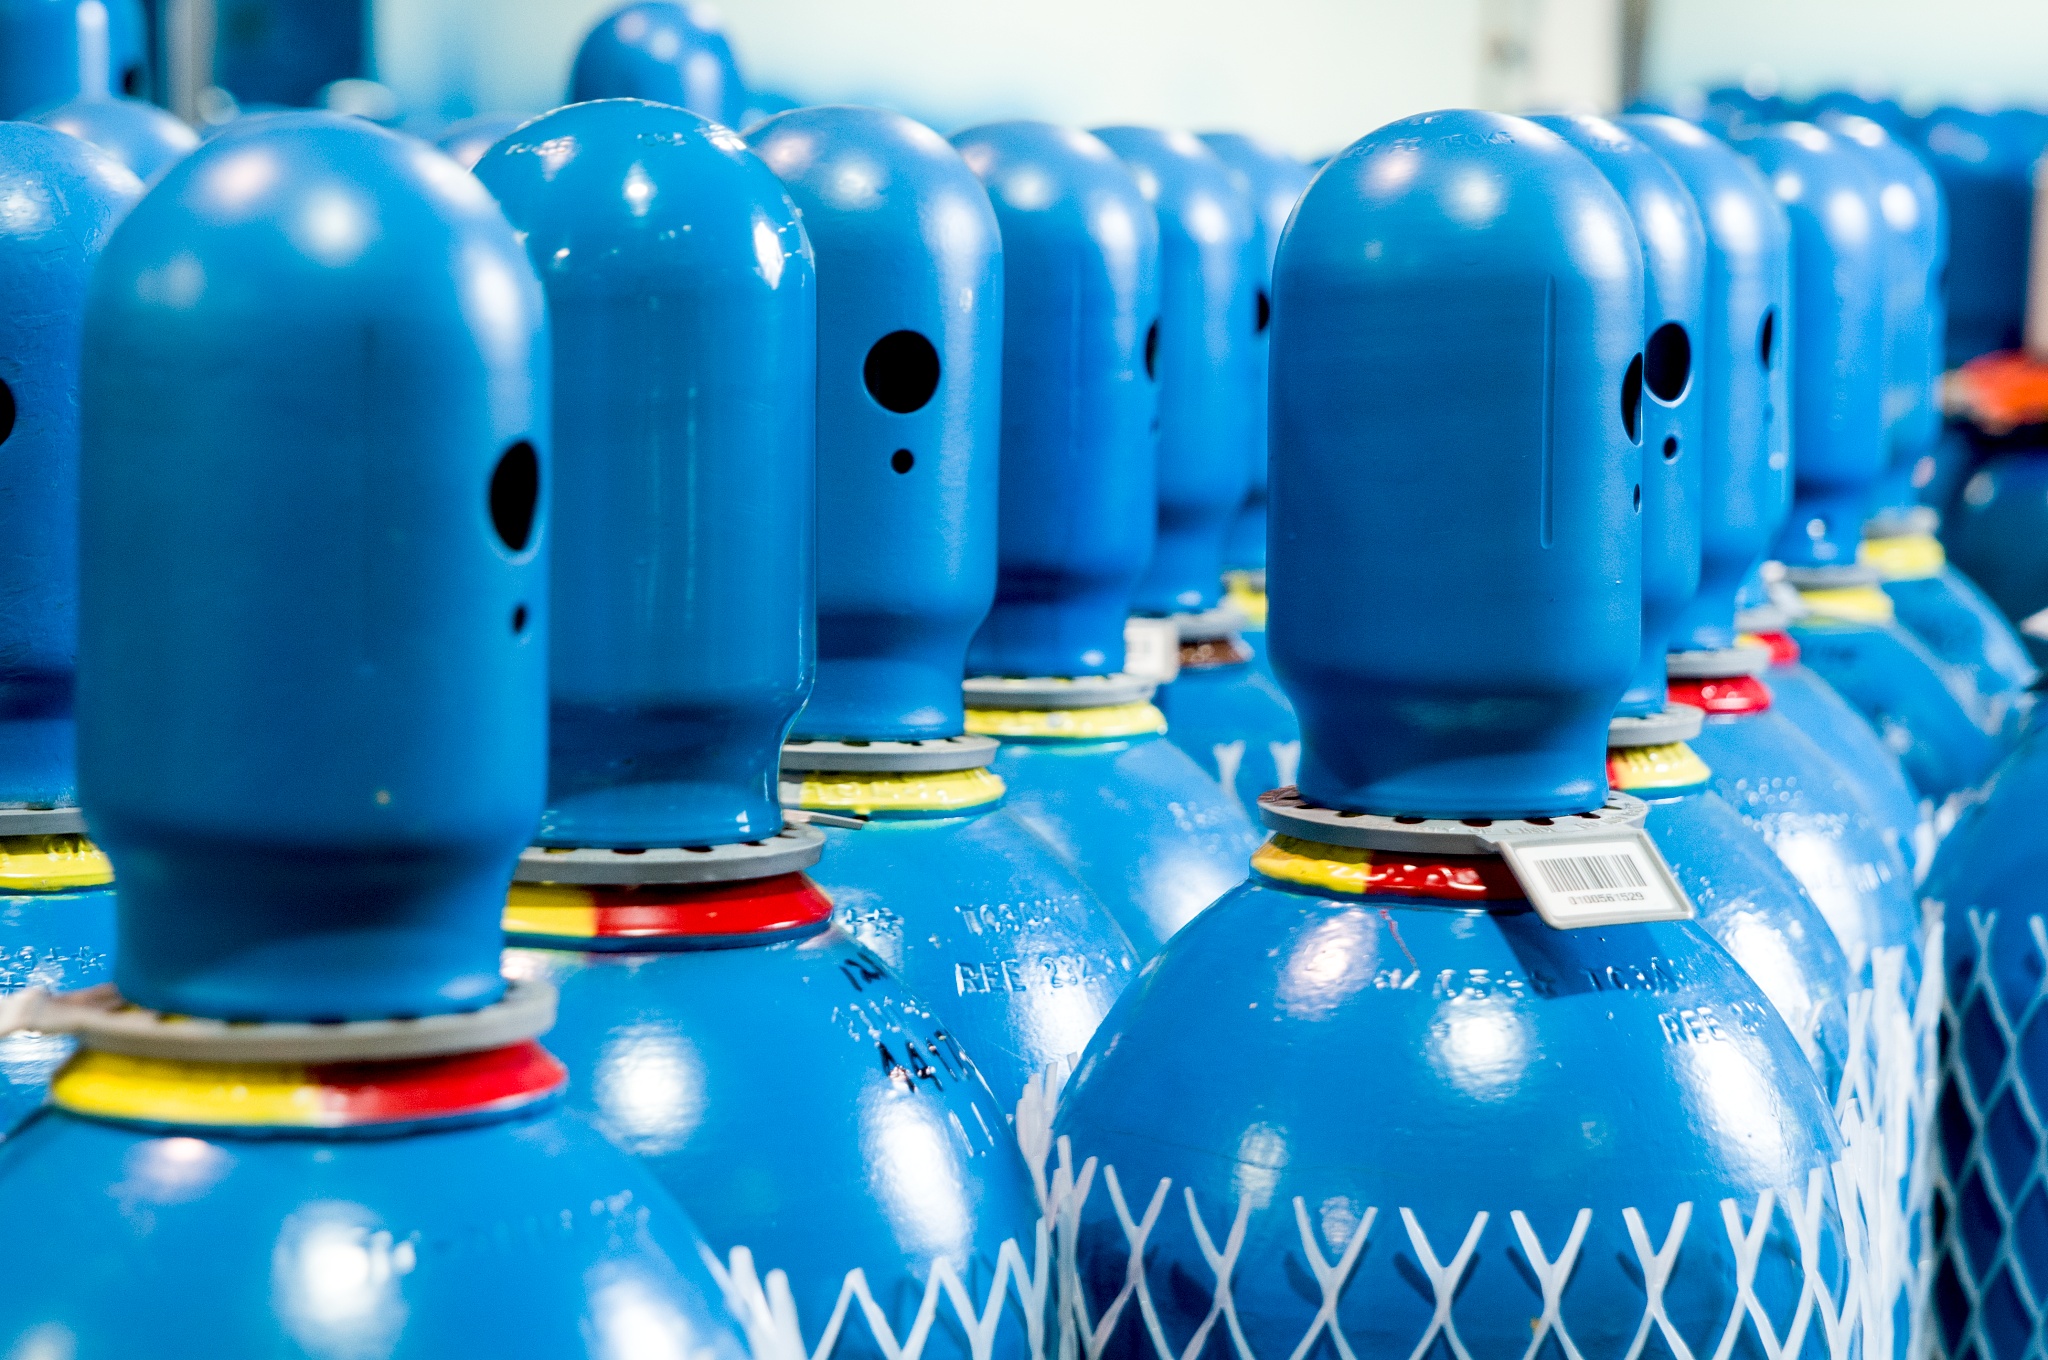 Close up showing blue caps and shoulders of rows of specialty gas cylinders at Alpha New Jersey. Newly labelled and netted cylinders, ready for delivery.